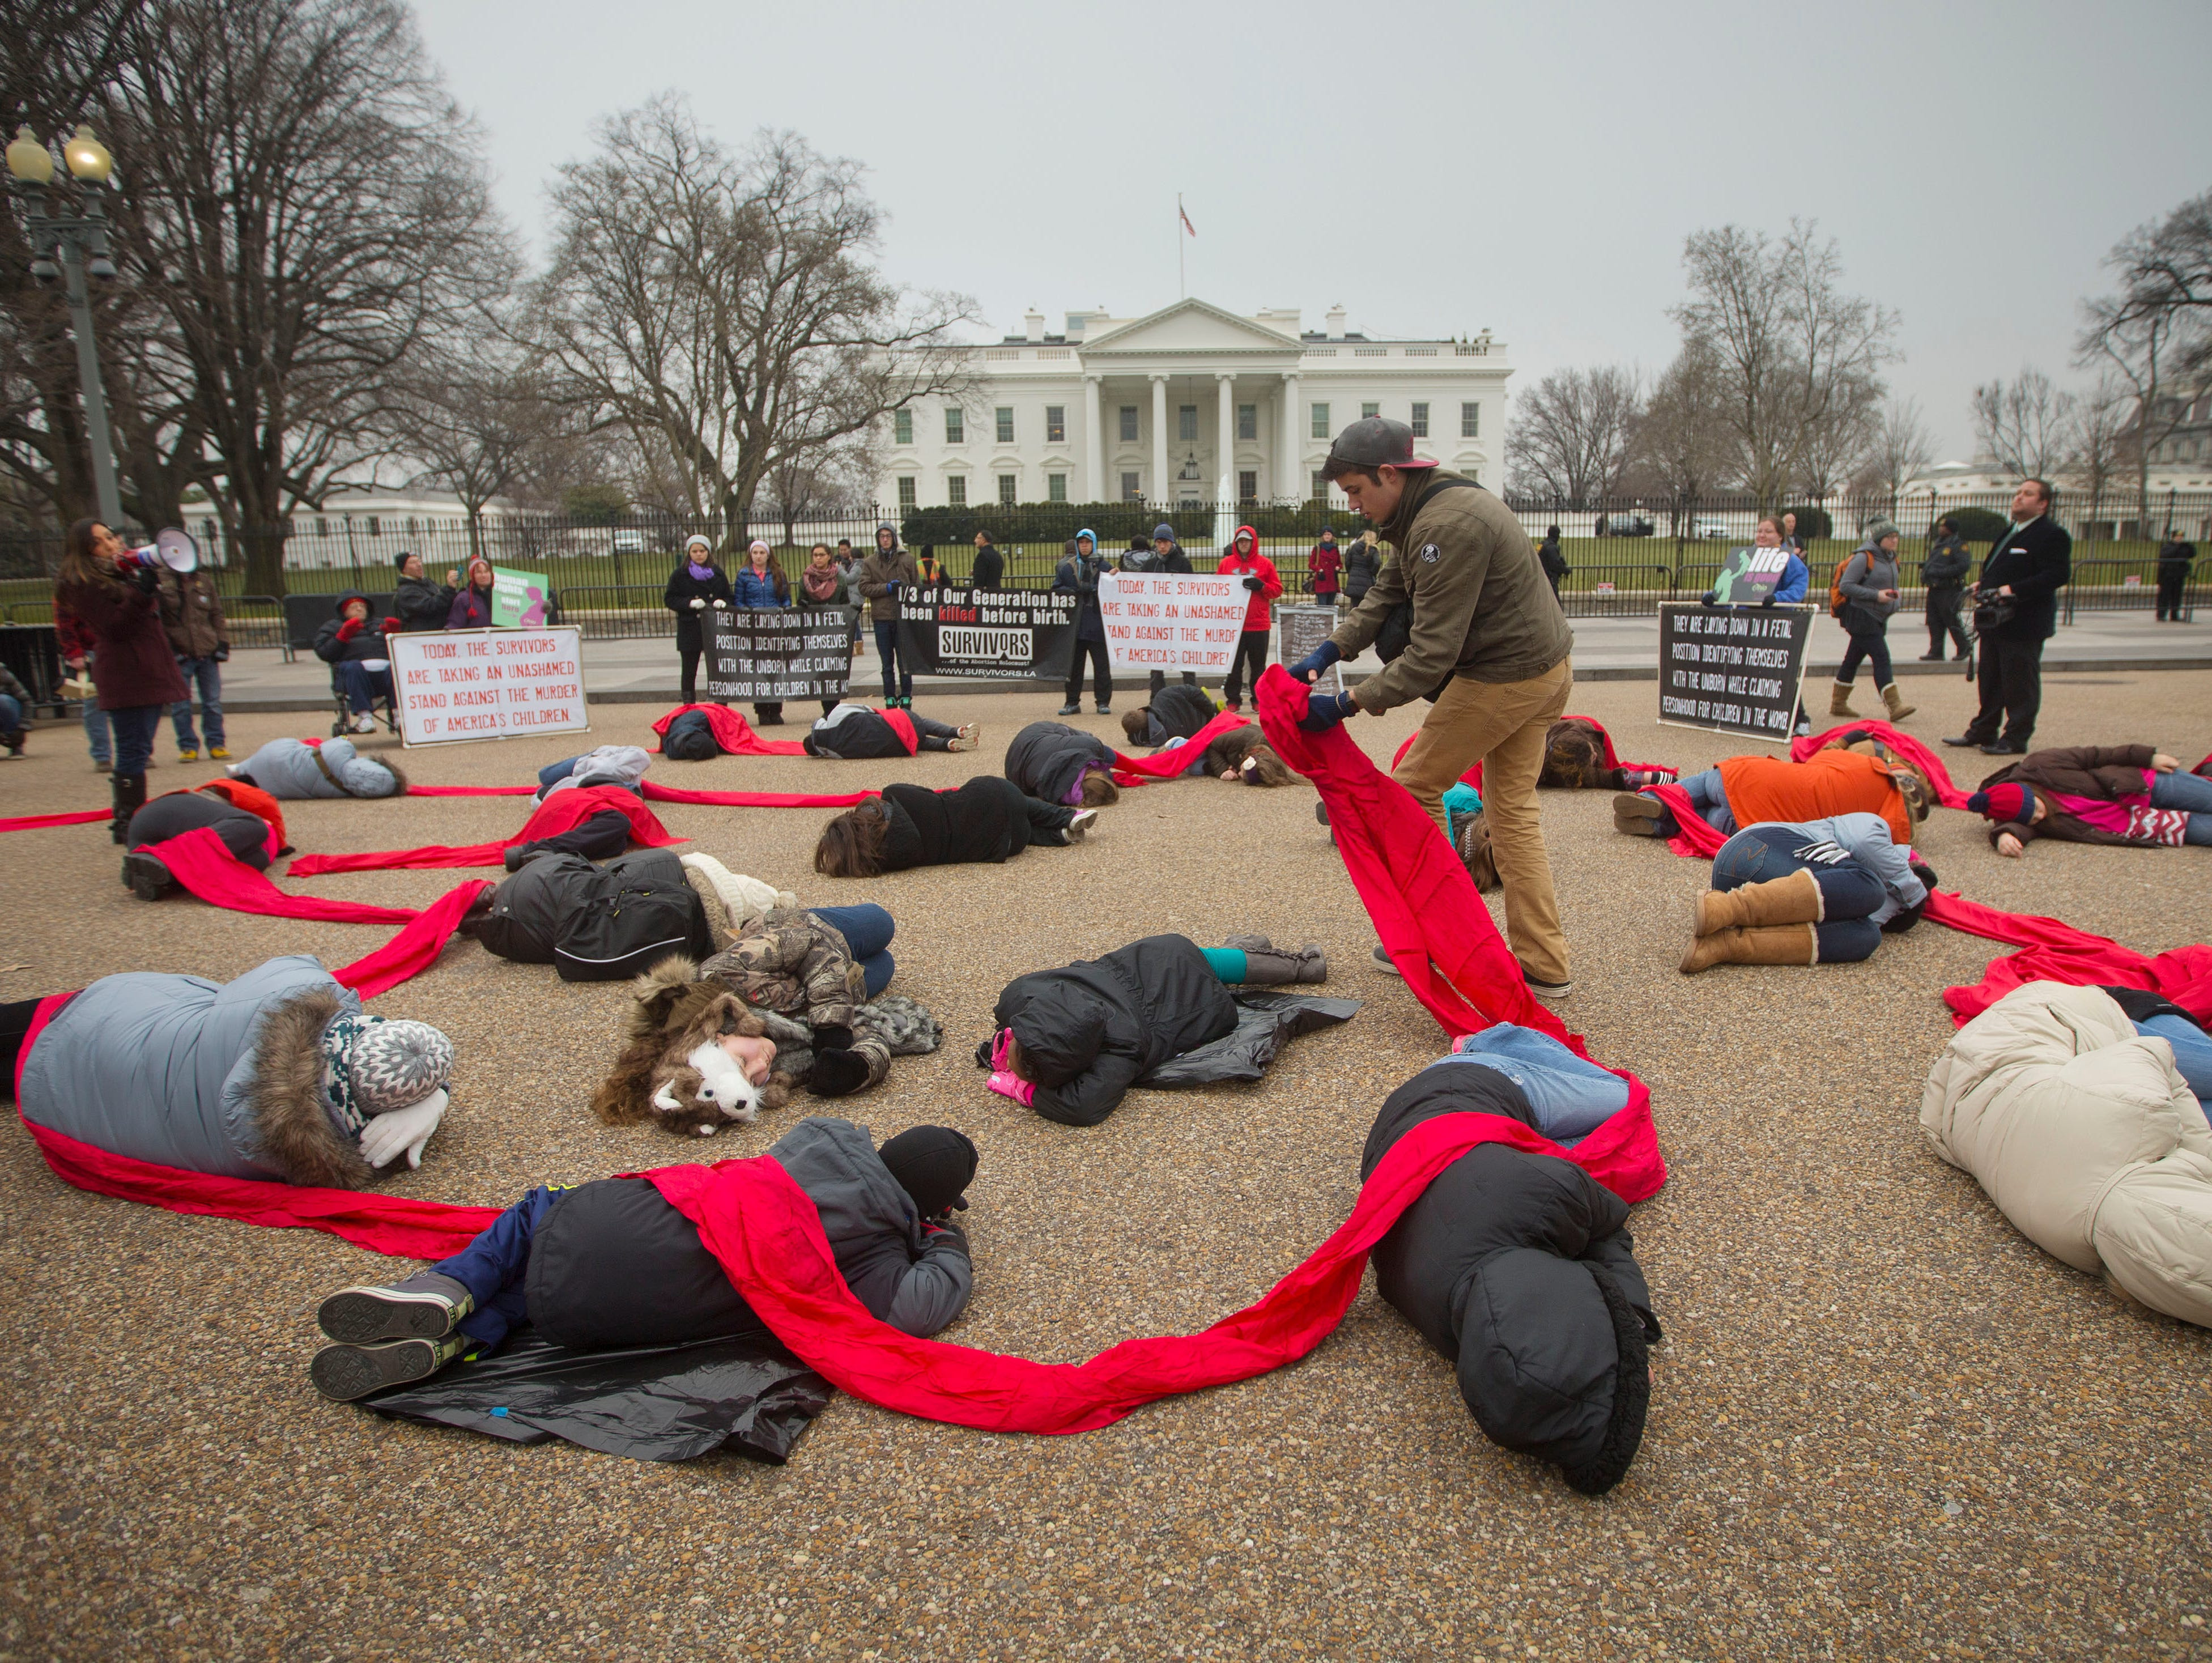 Abortion rights opponents are connected with a red piece of cloth as they stage a 'die-in' in front of the White House in Washington, Wednesday.